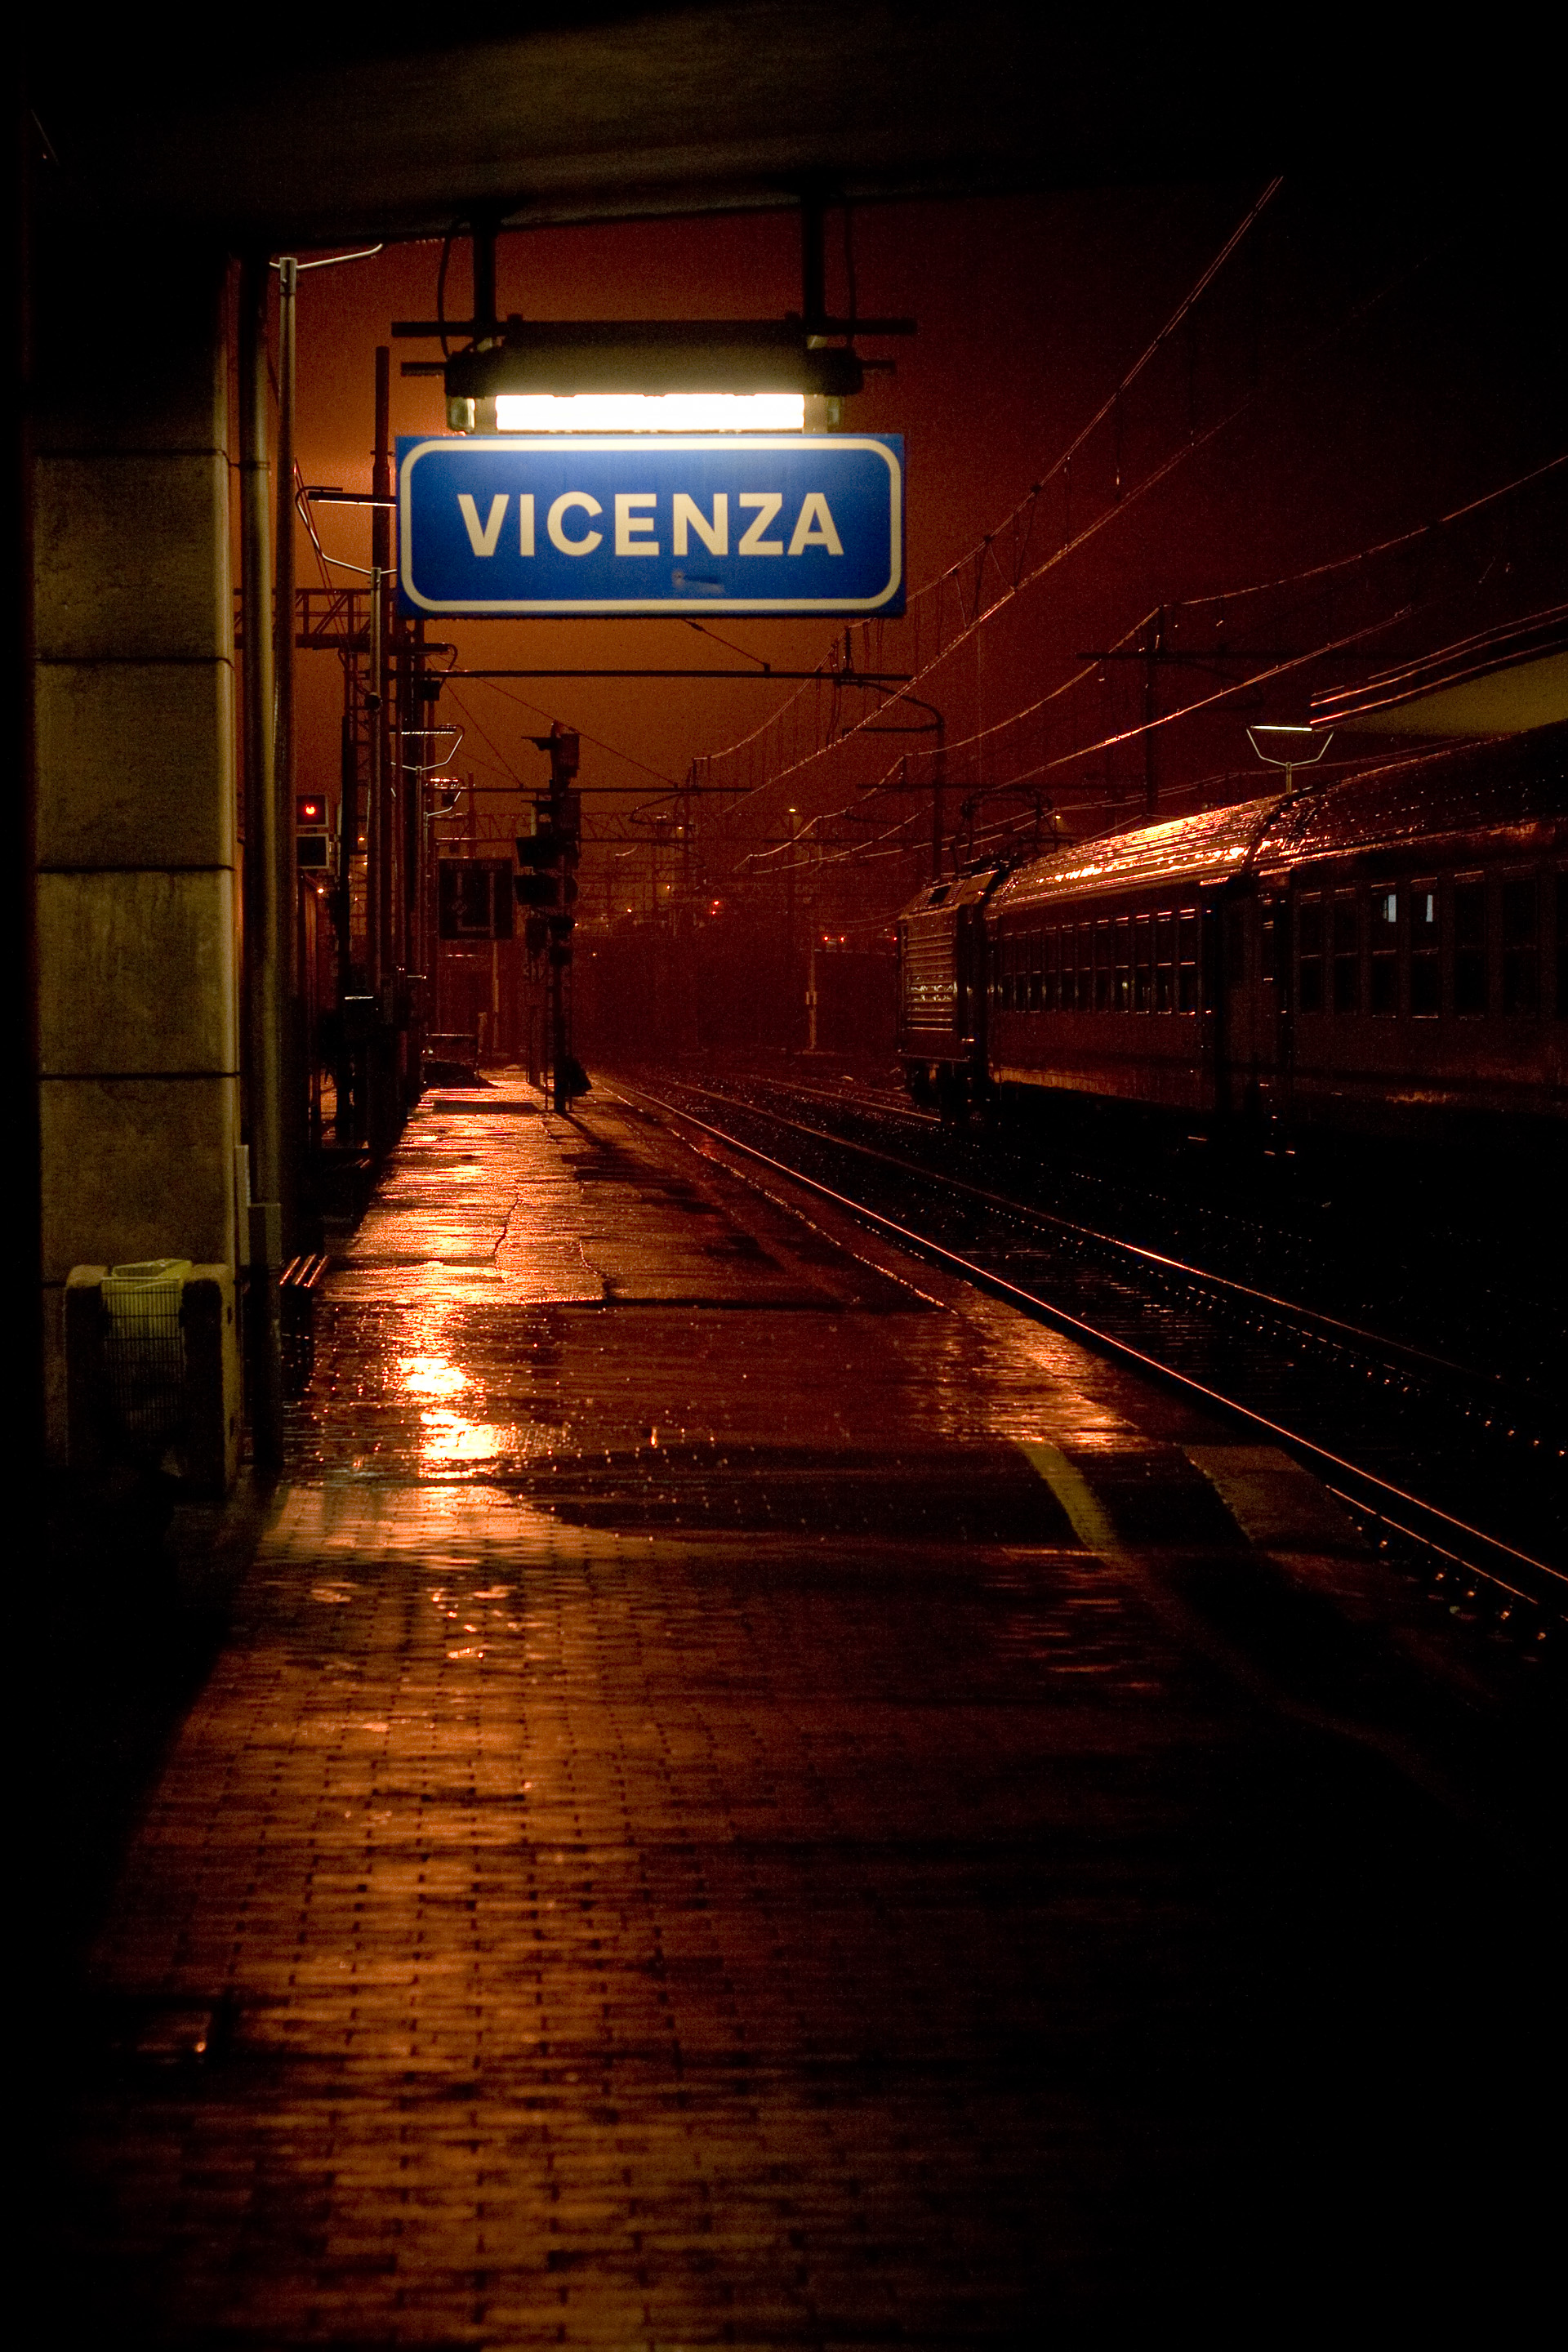 33 · Vicenza
Click to view previous post